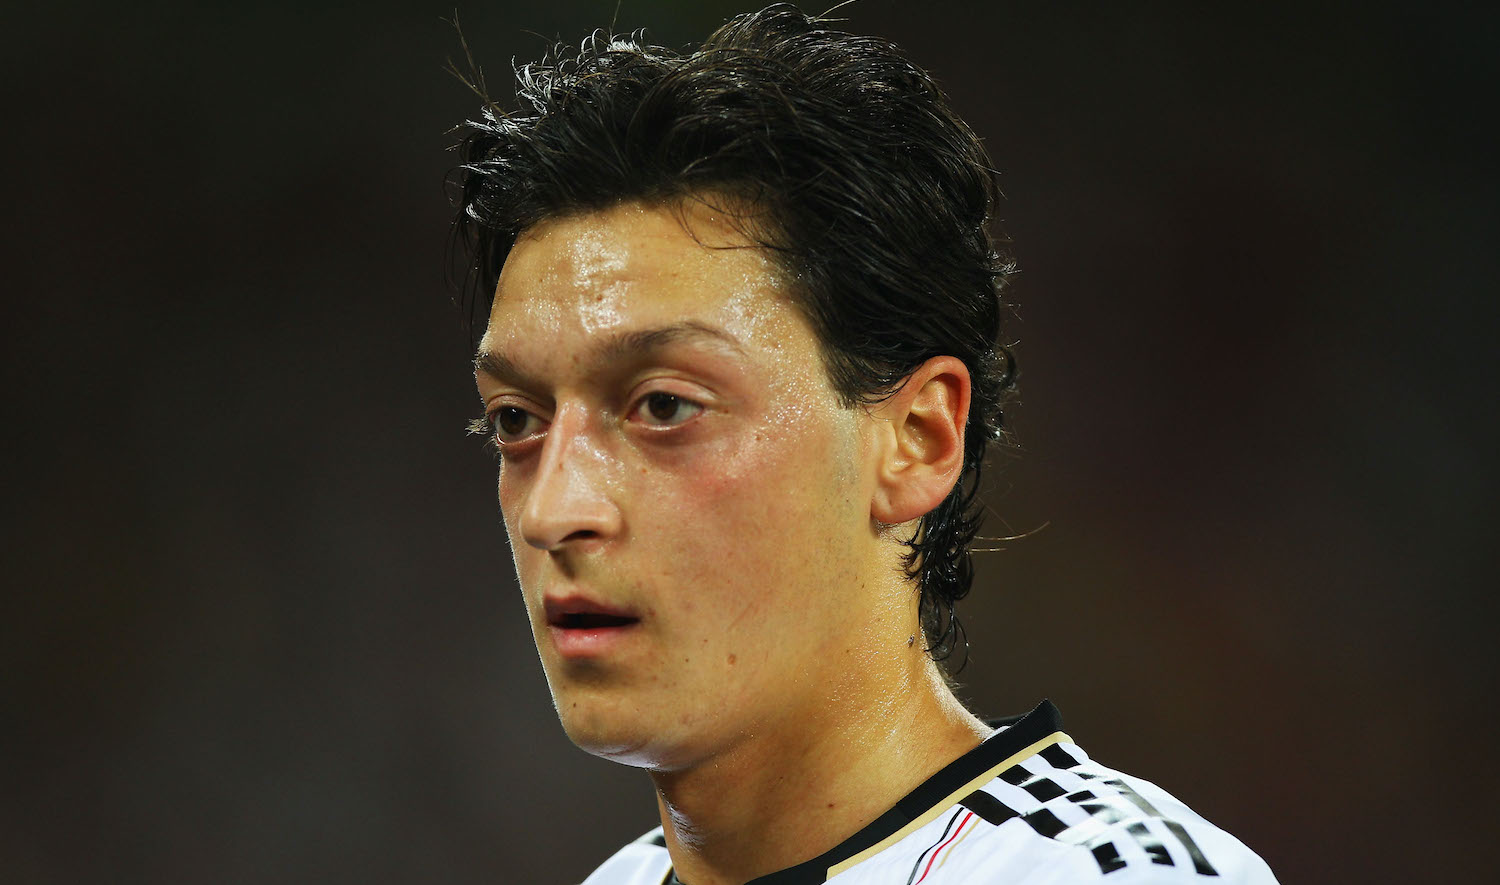 Ozil warms up before the 2010 FIFA World Cup South Africa Semi Final match between Germany and Spain at Durban Stadium on July 7, 2010 in Durban, South Africa.